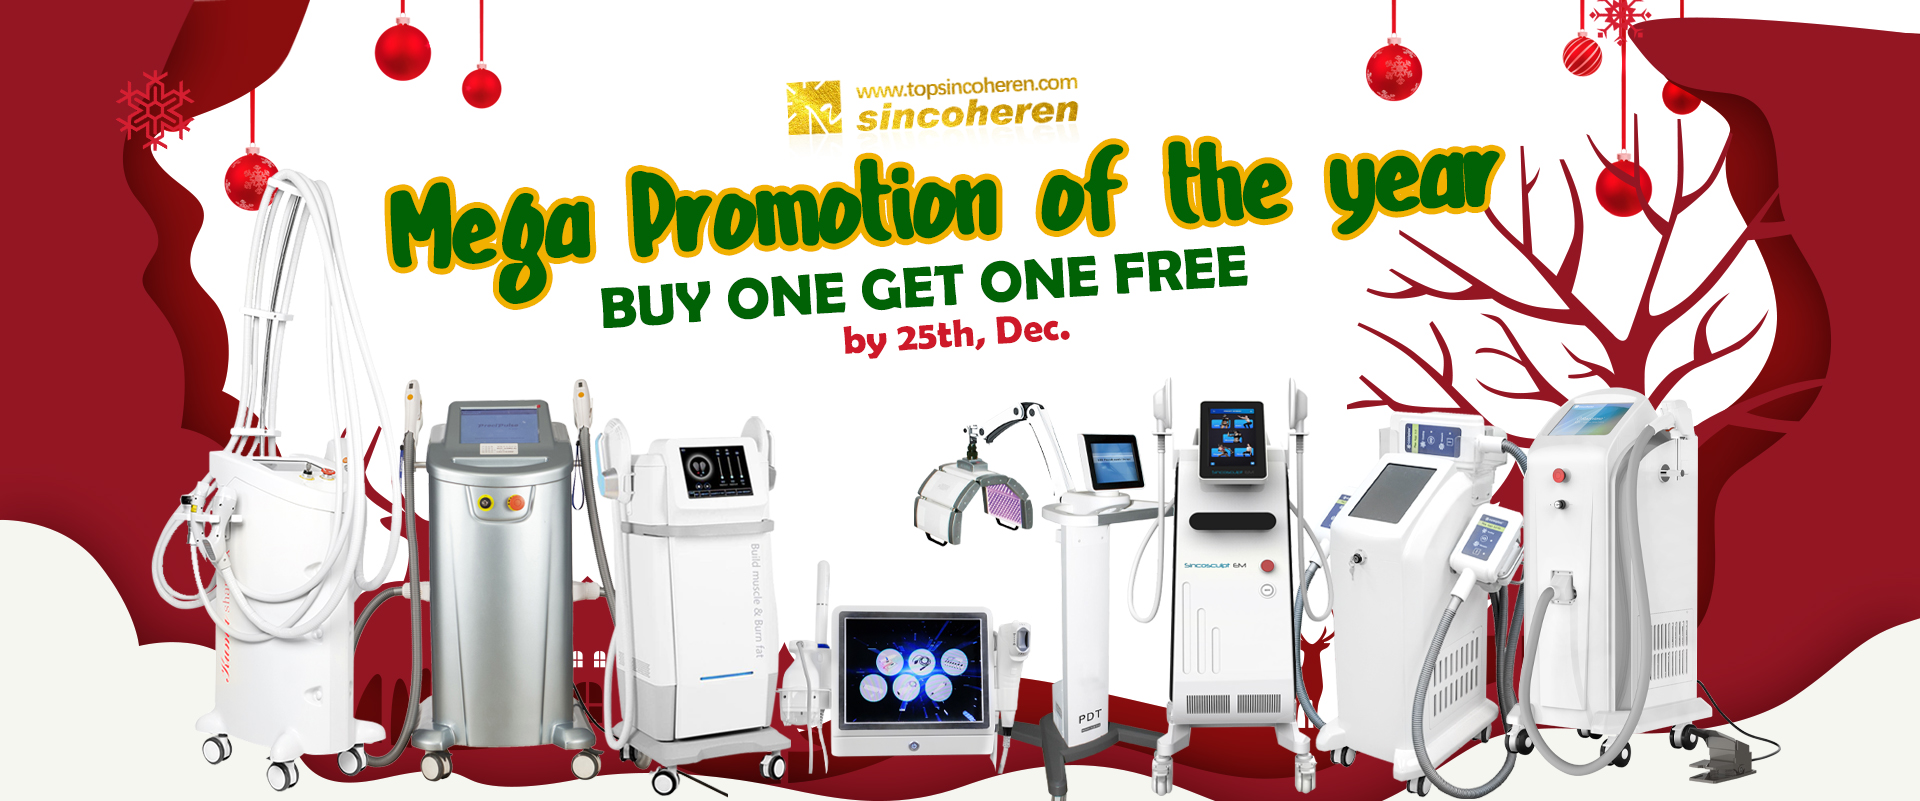 Topsincoheren Christmas promotion of the year – Buy one get one free